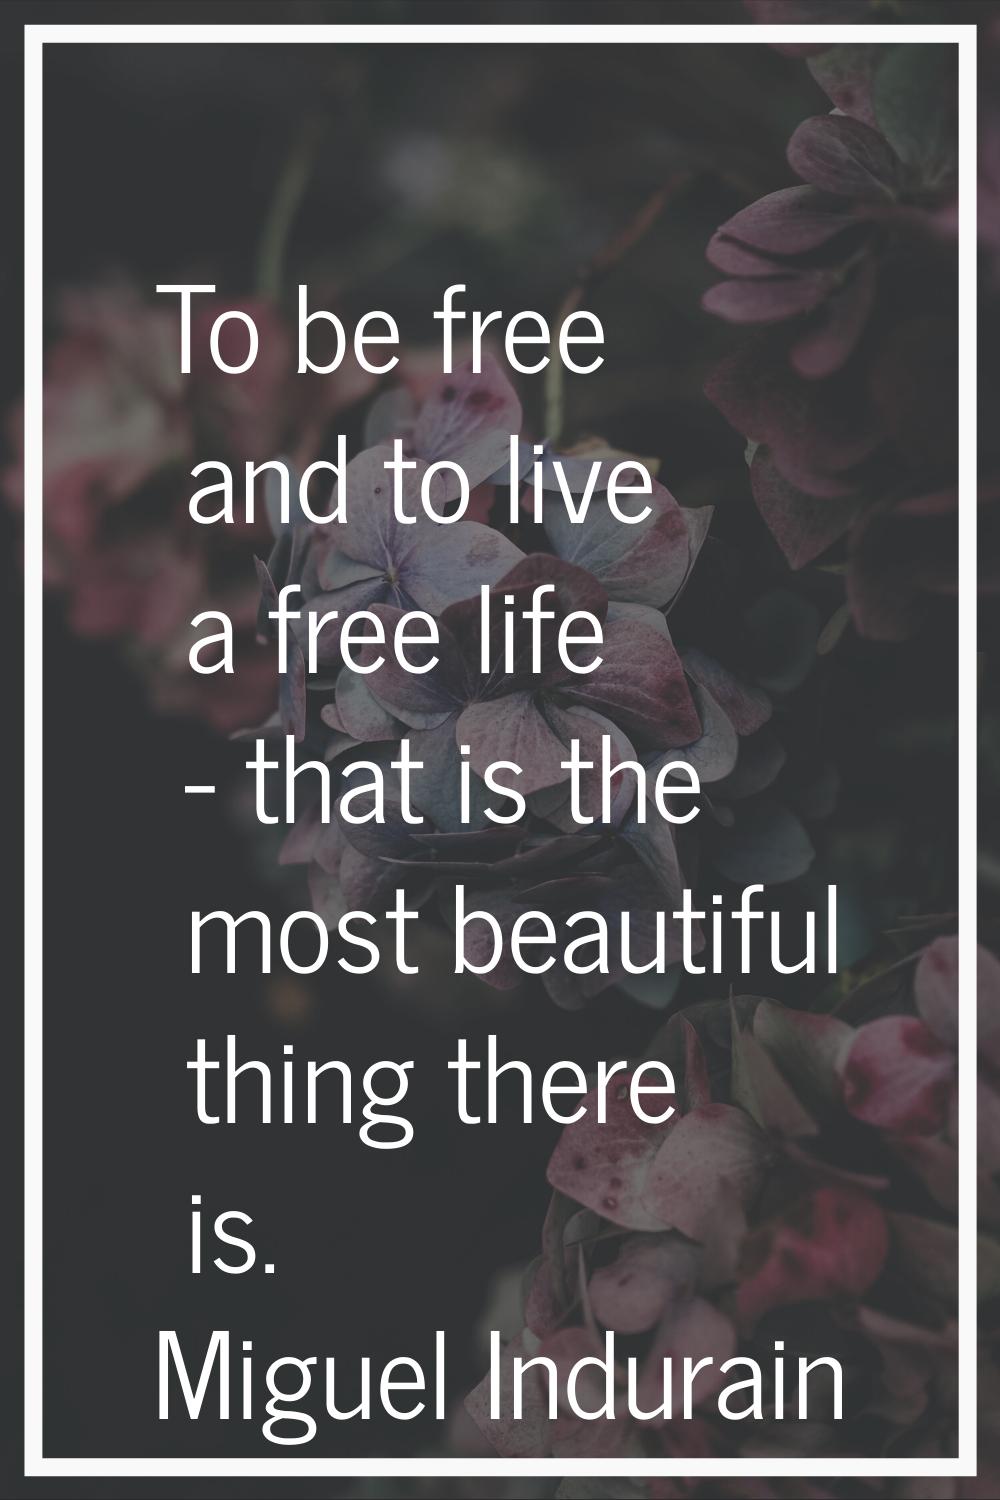 To be free and to live a free life - that is the most beautiful thing there is.